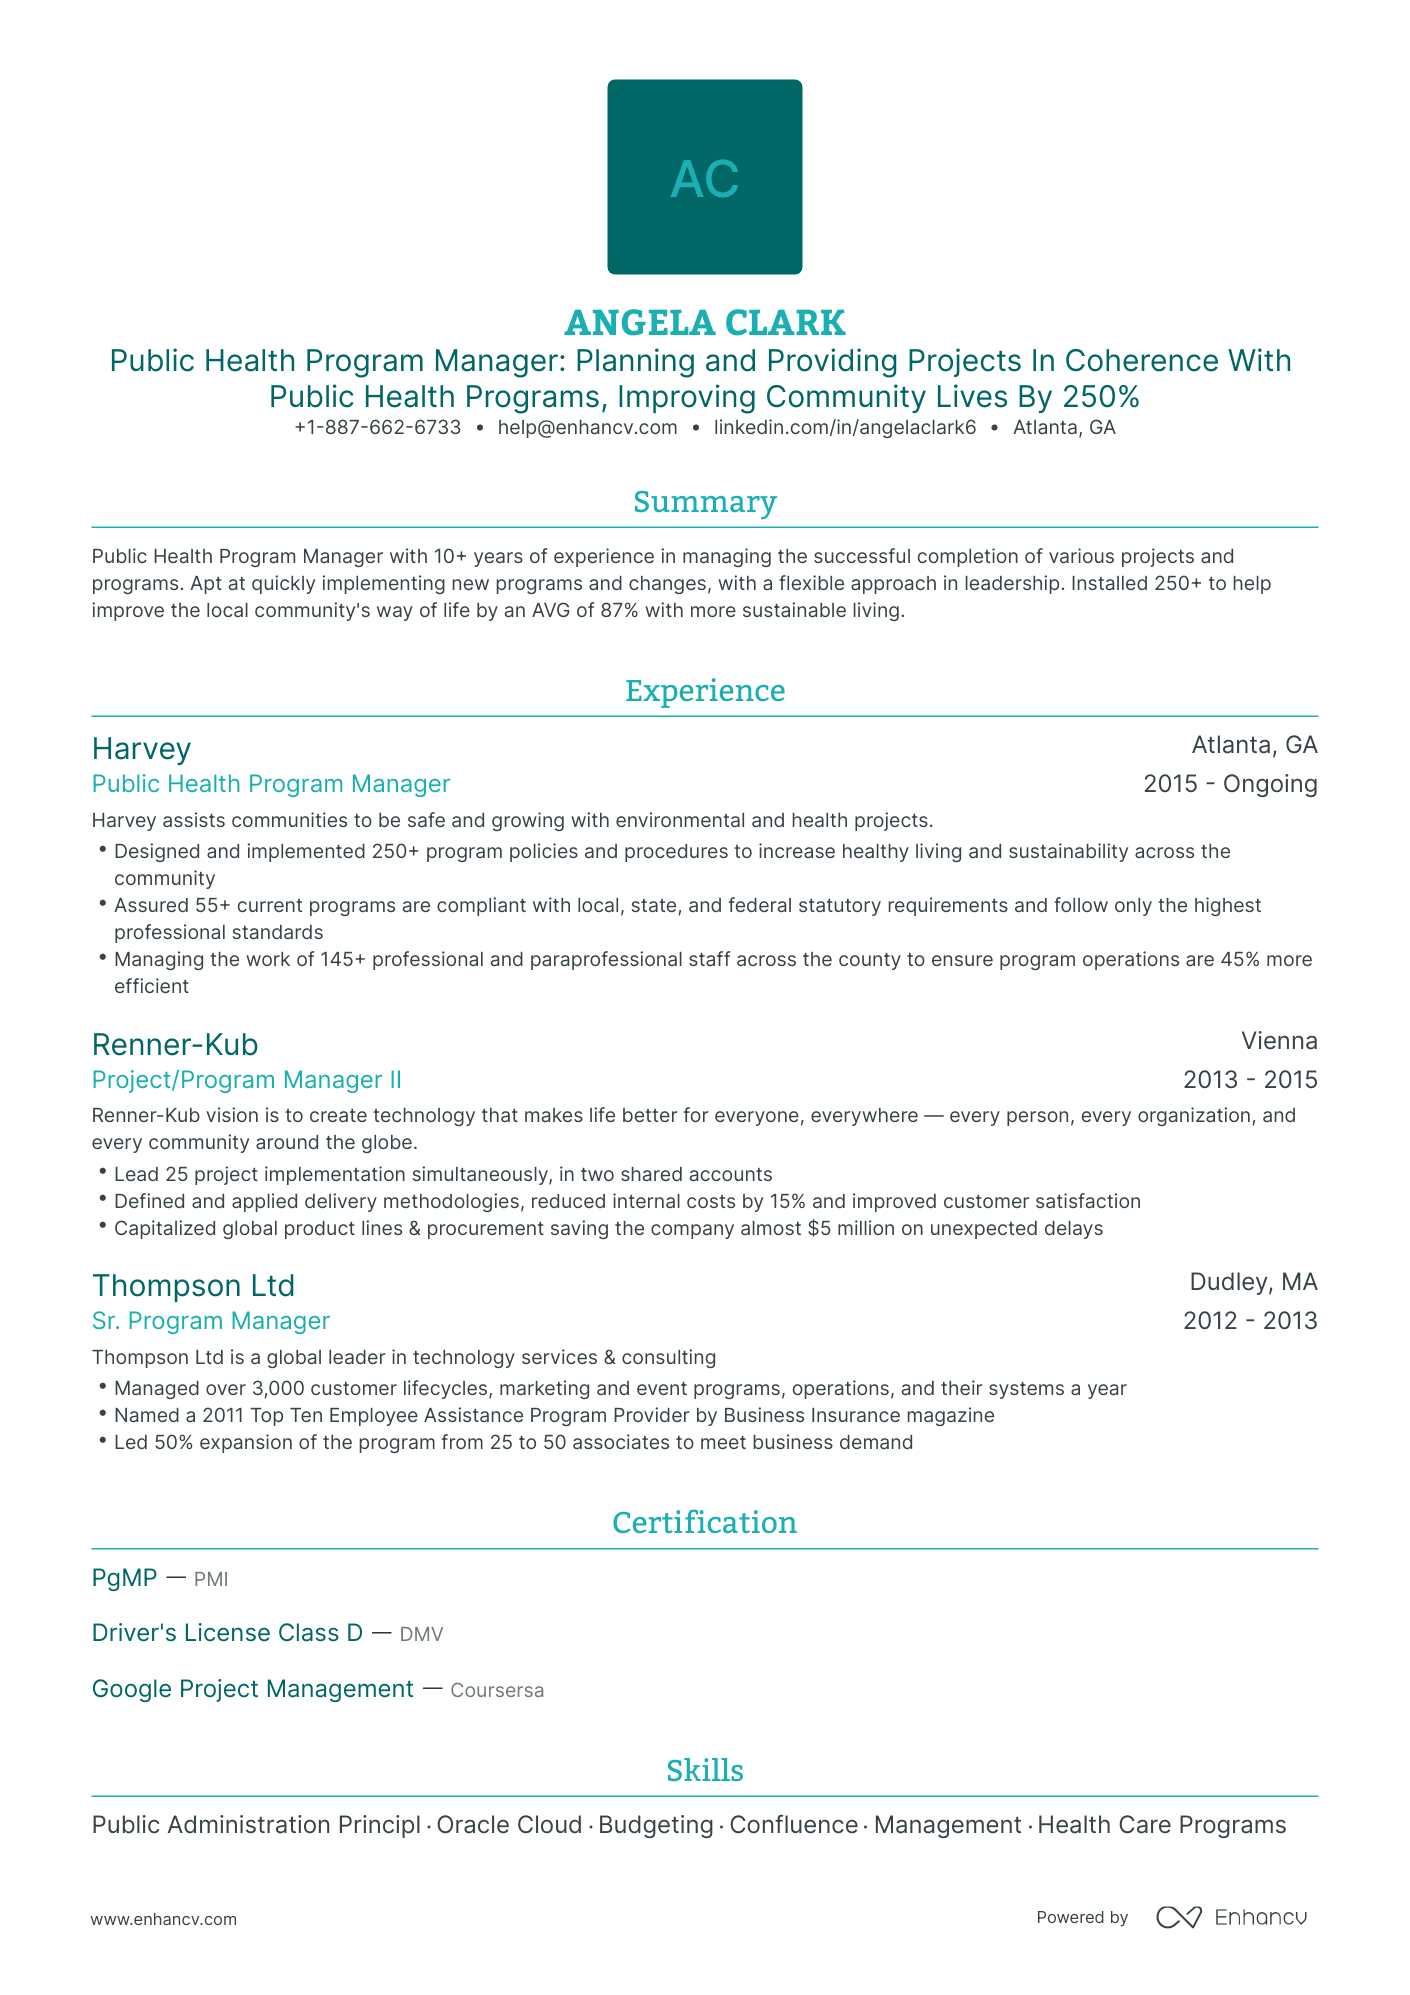 Traditional Public Health Program Manager Resume Template